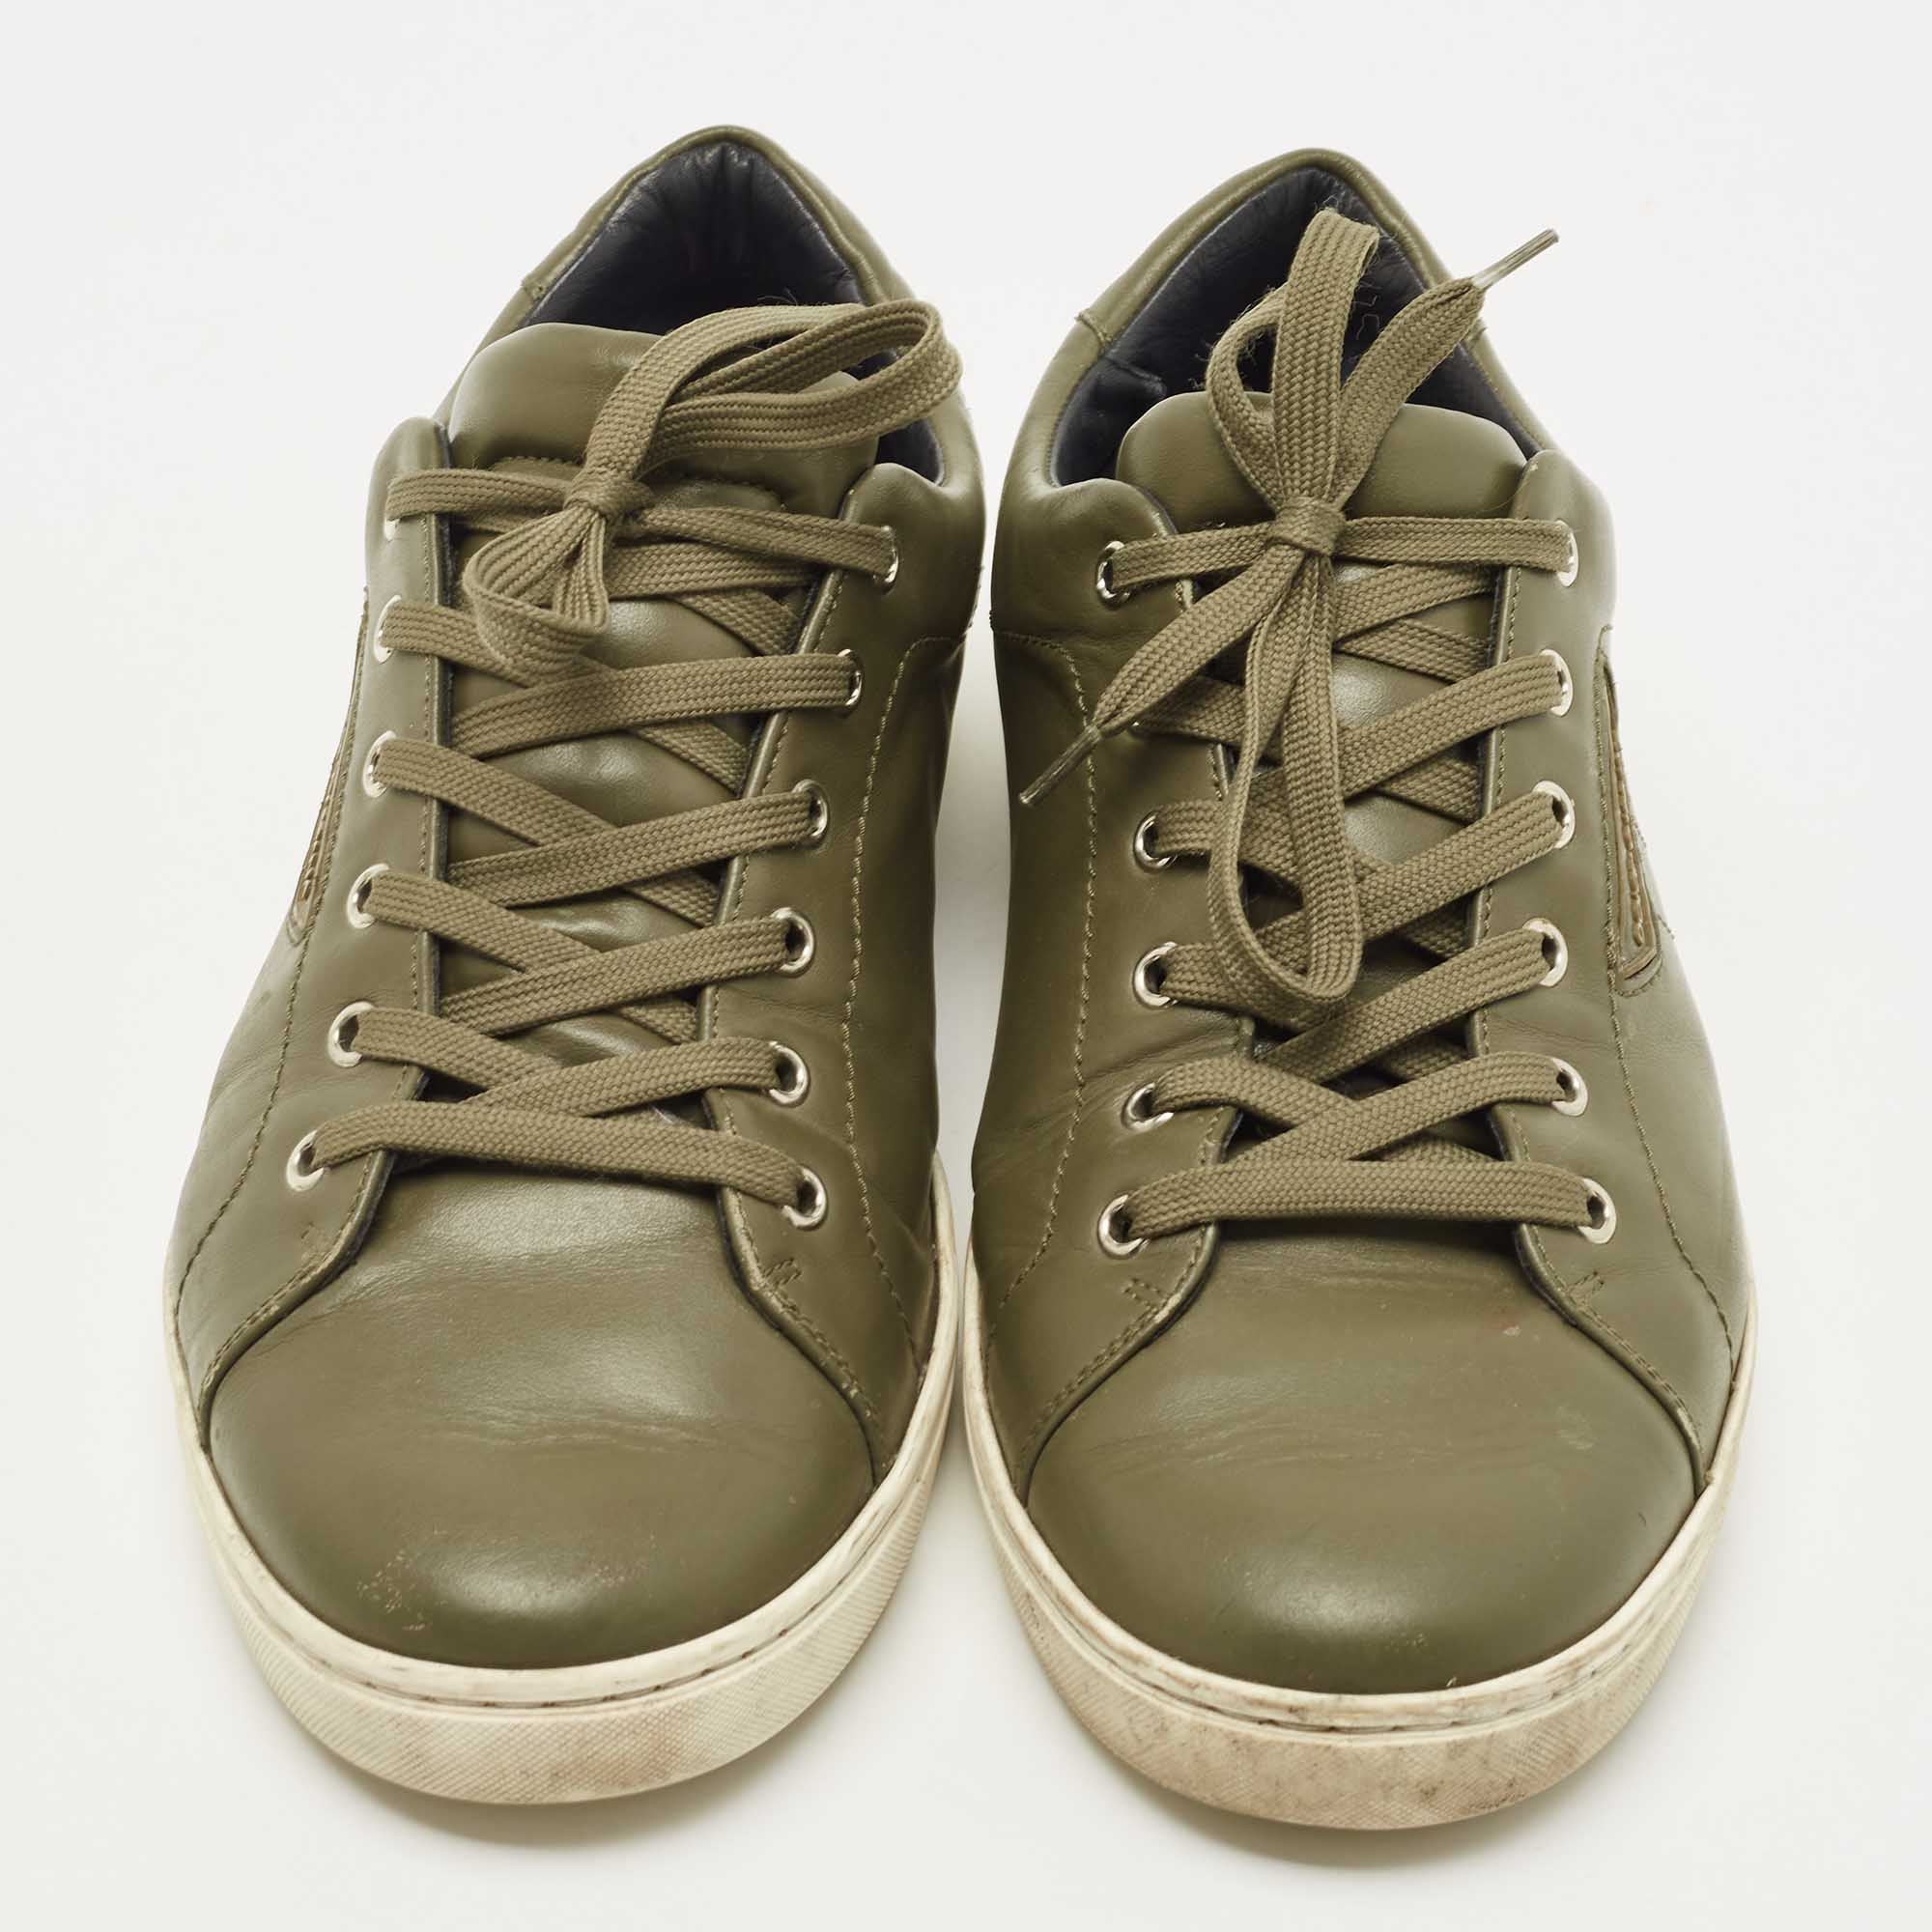 Dolce & Gabbana Army Green Leather Low Top Sneakers Size 42